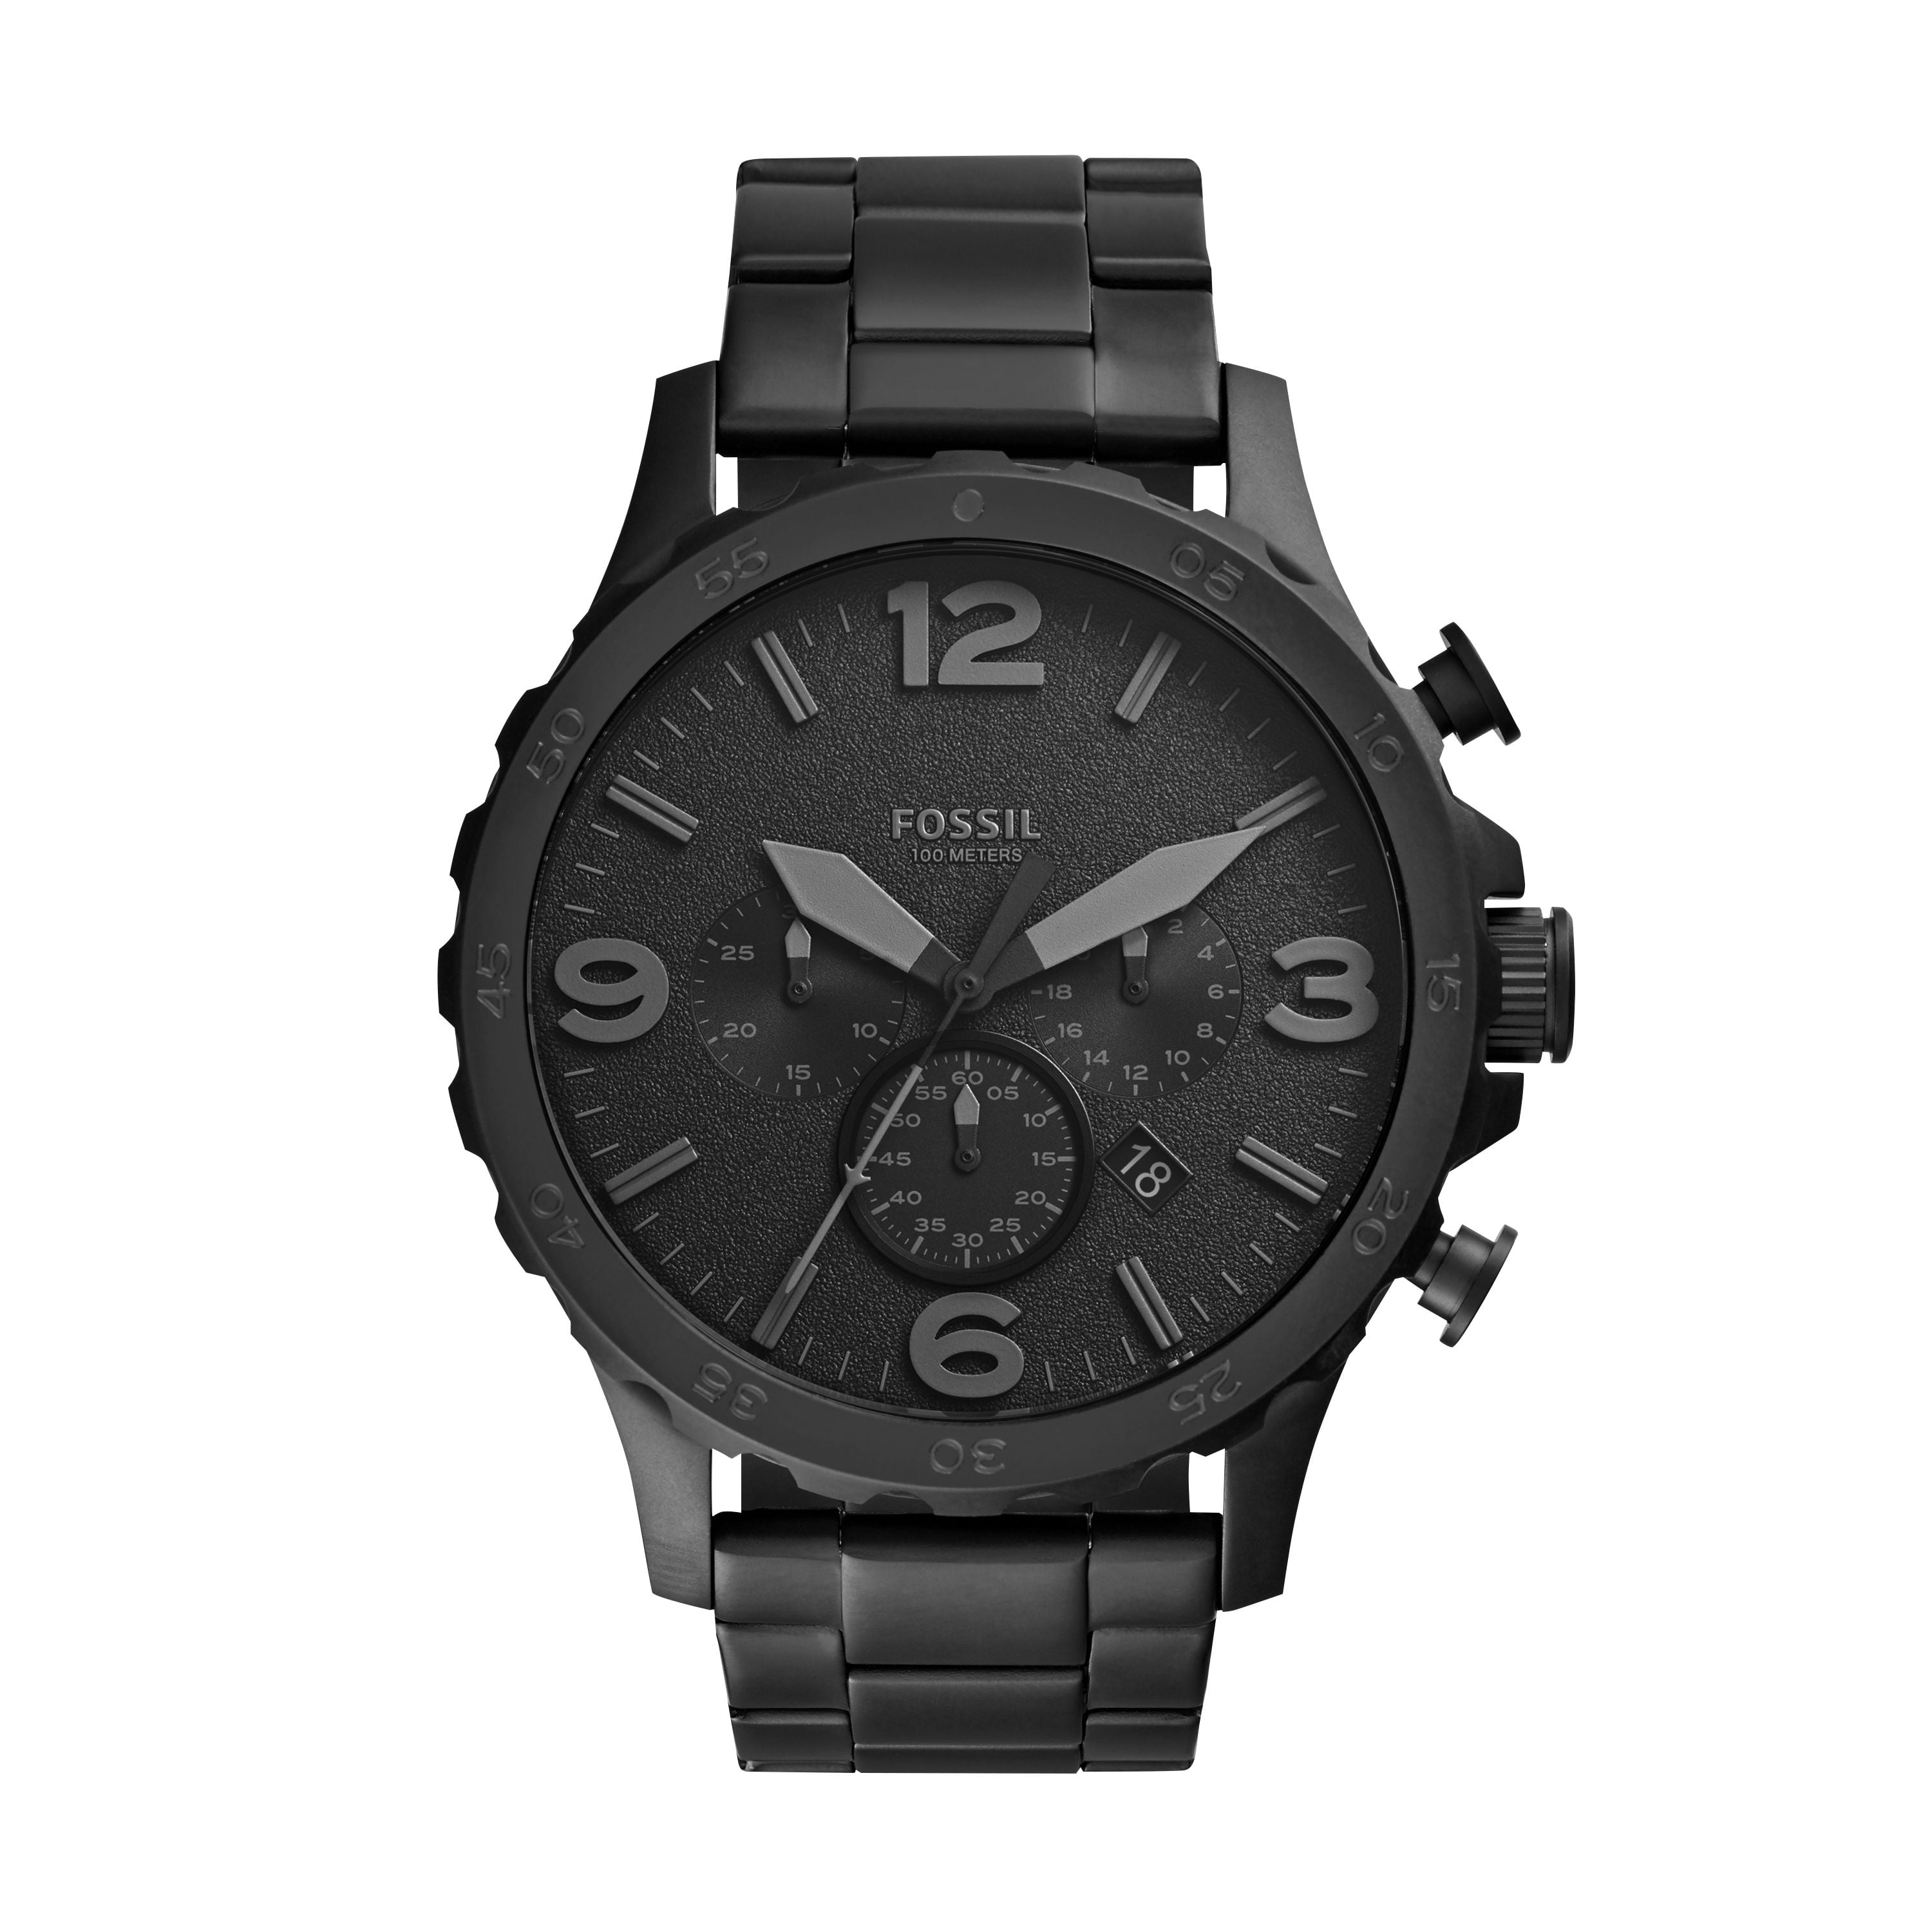 Fossil JR1401 Men&s Nate Stainless Steel Chronograph Watch - Black